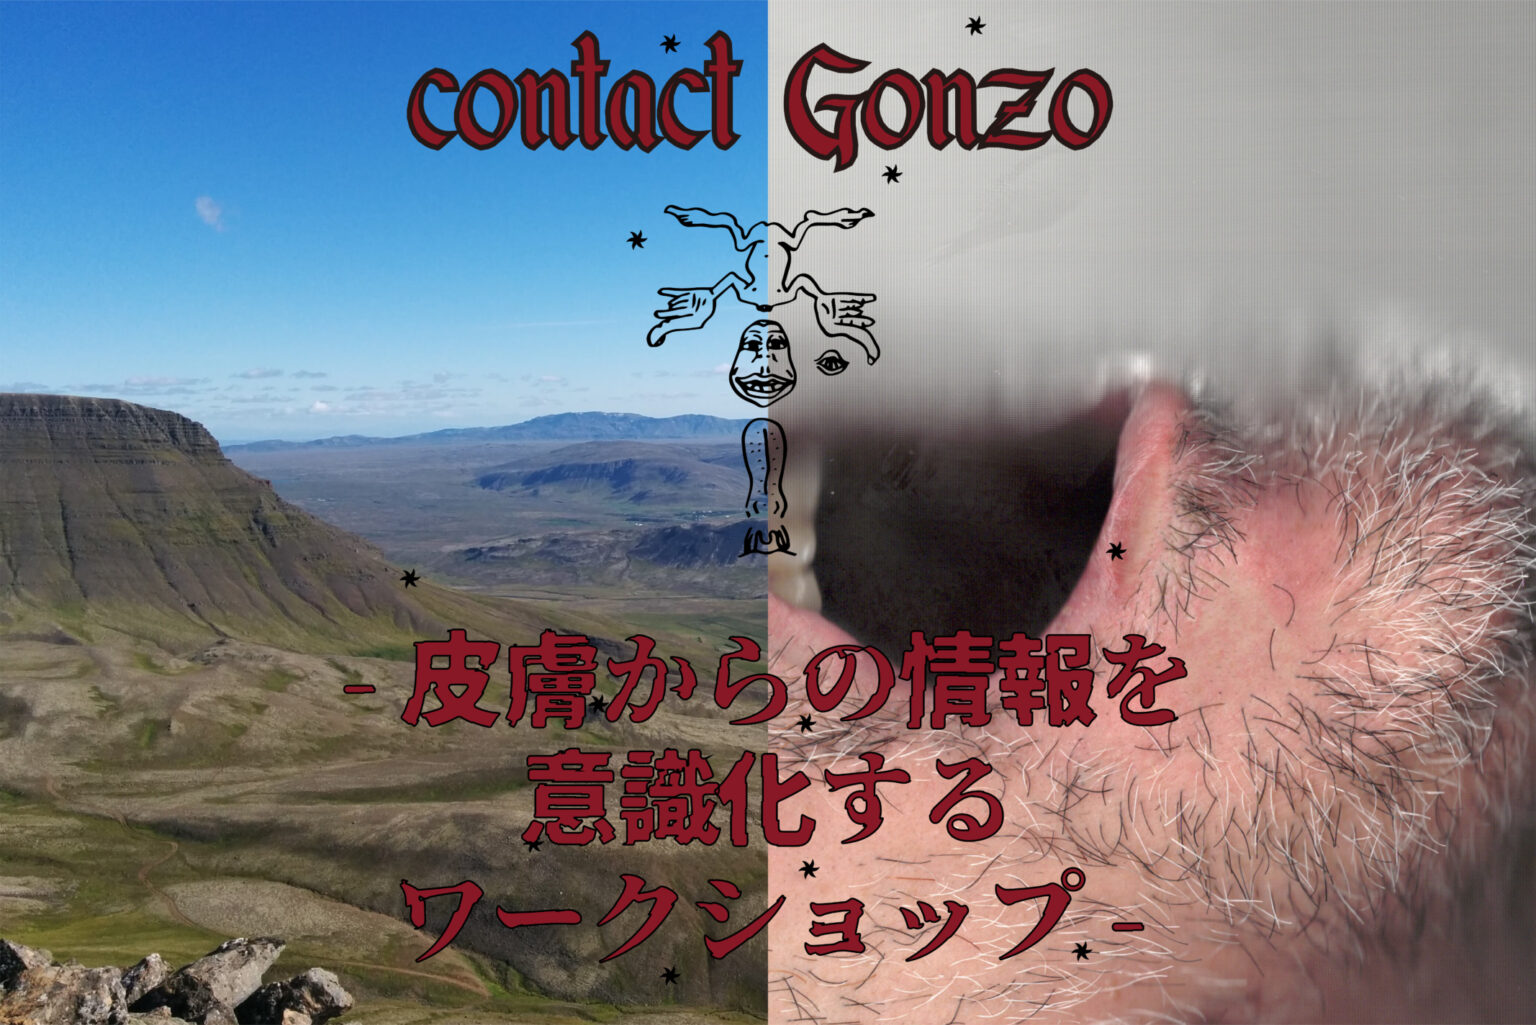 contact Gonzo「Welcome to the Skinland ー皮膚からの情報を意識化するワークショップー」